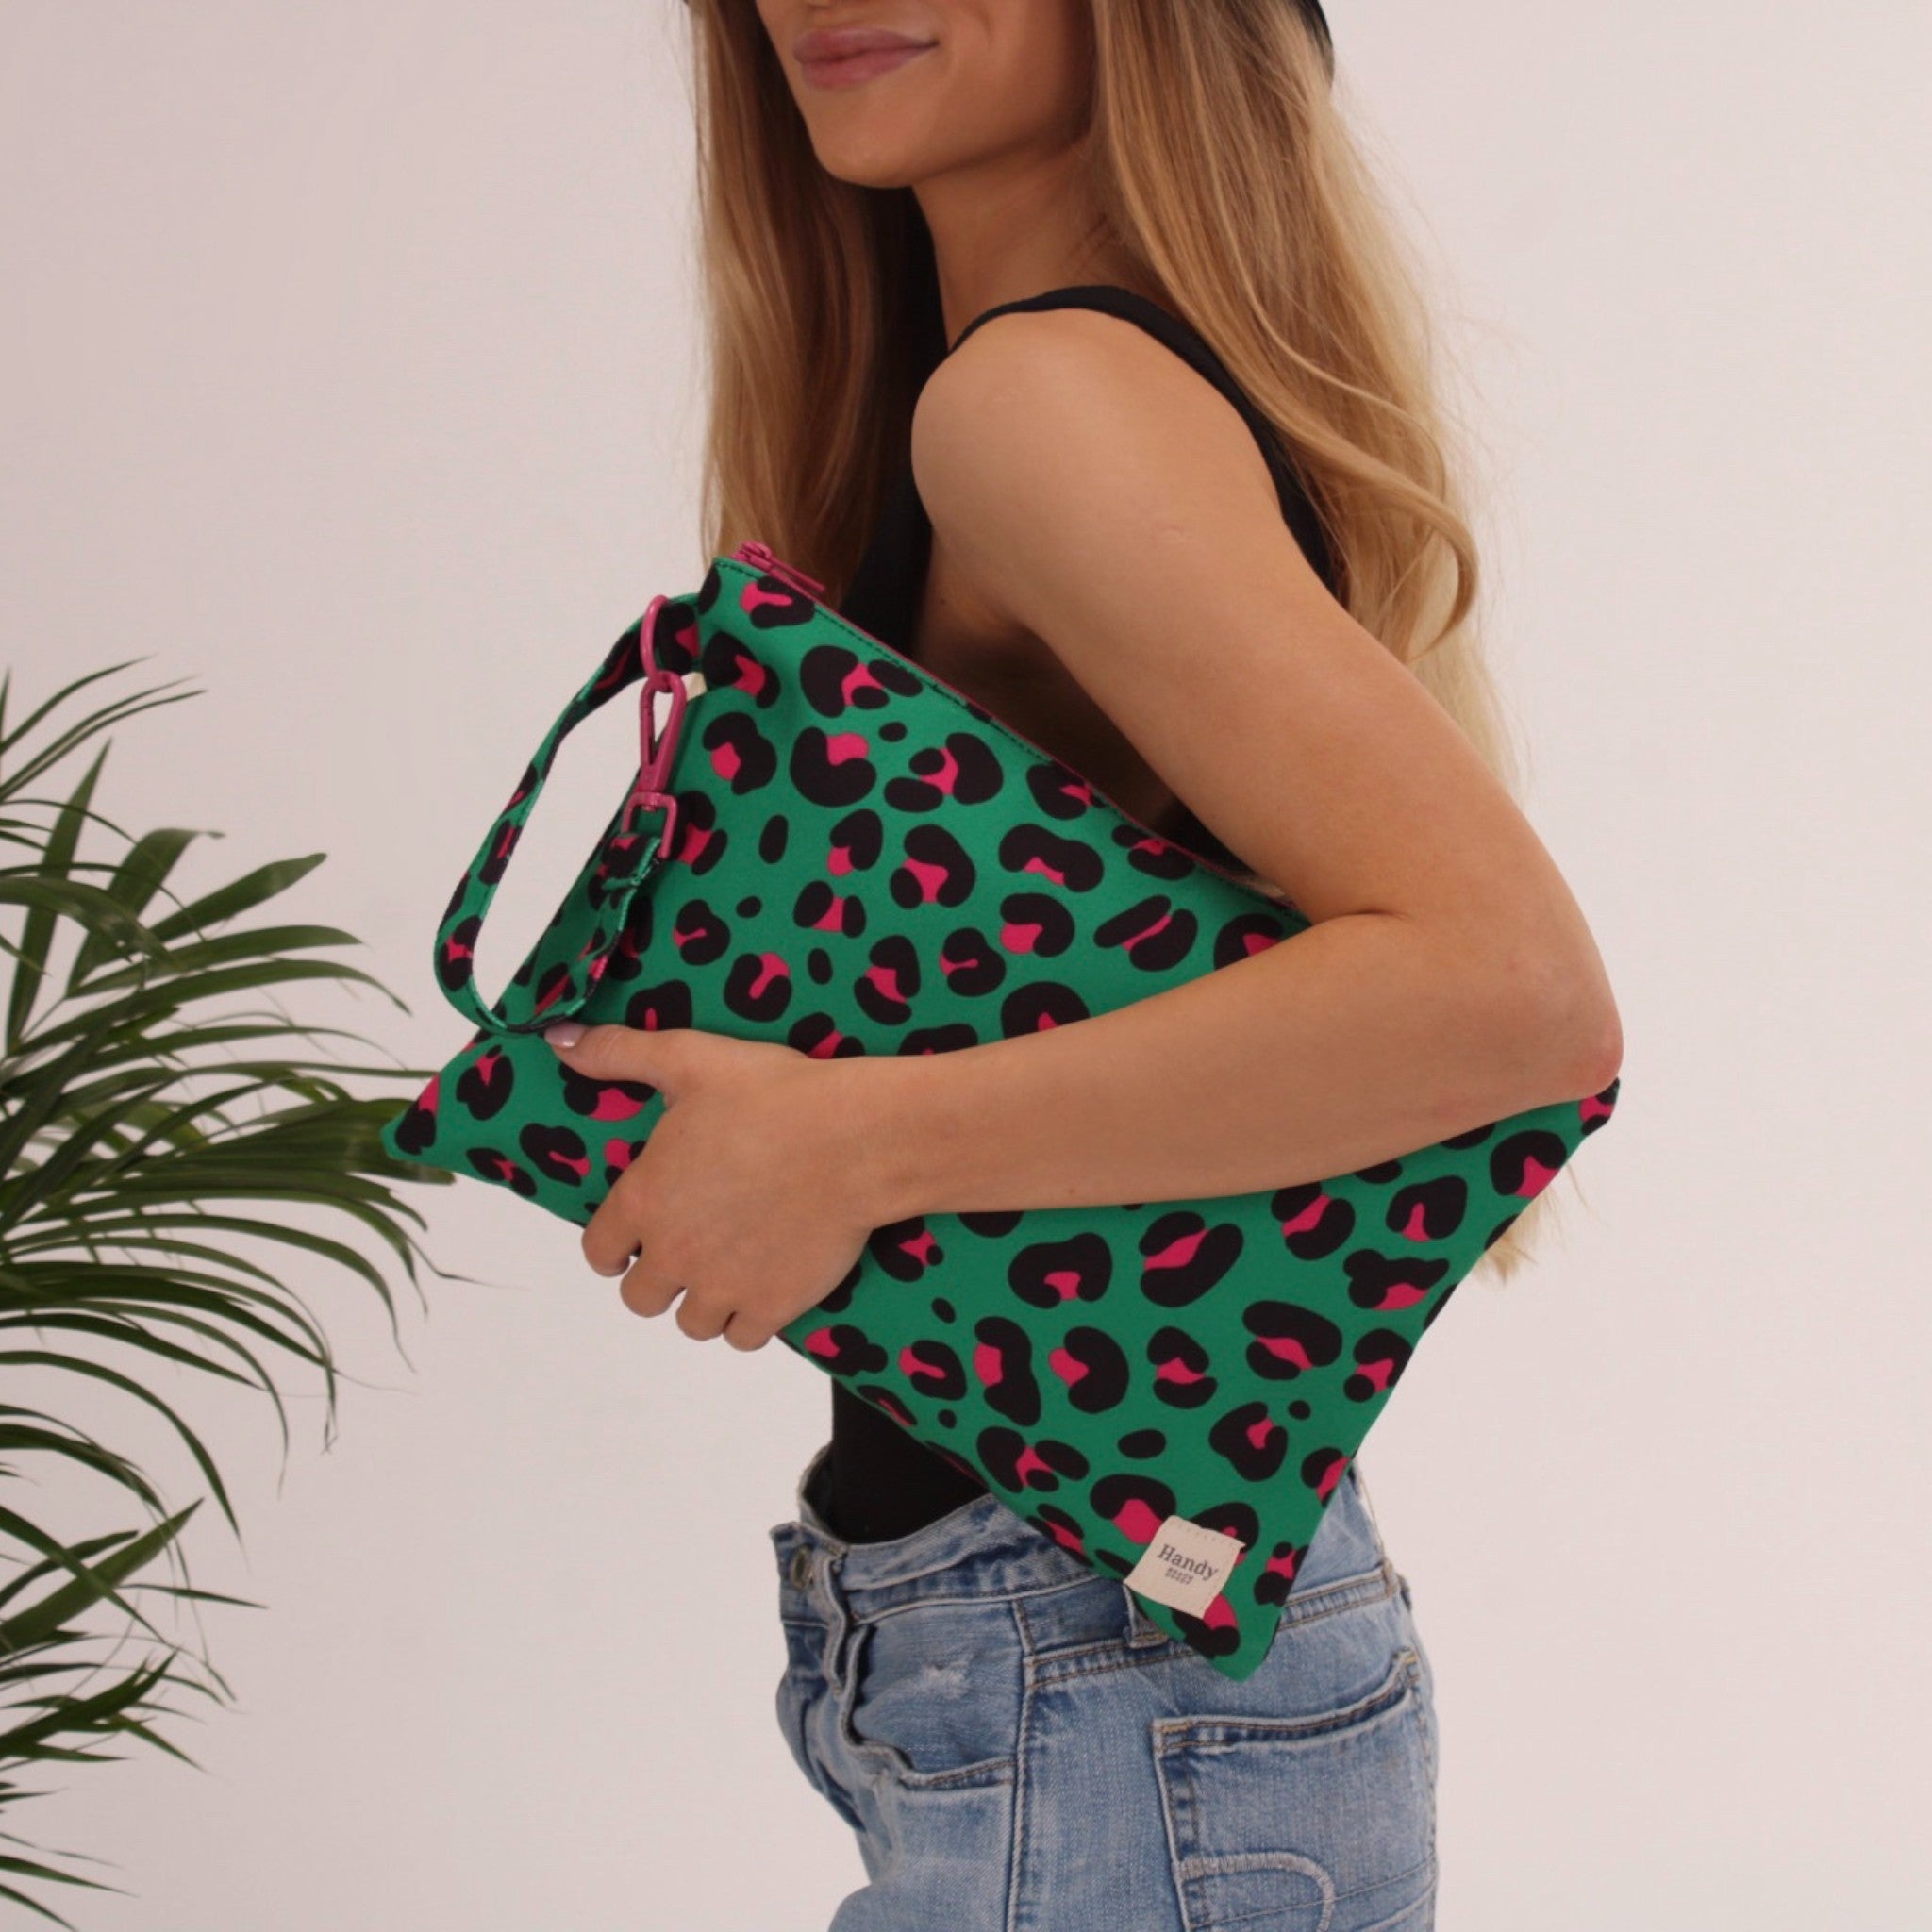 LEOPARD - POUCH WITH WRISTLET BUCKLE